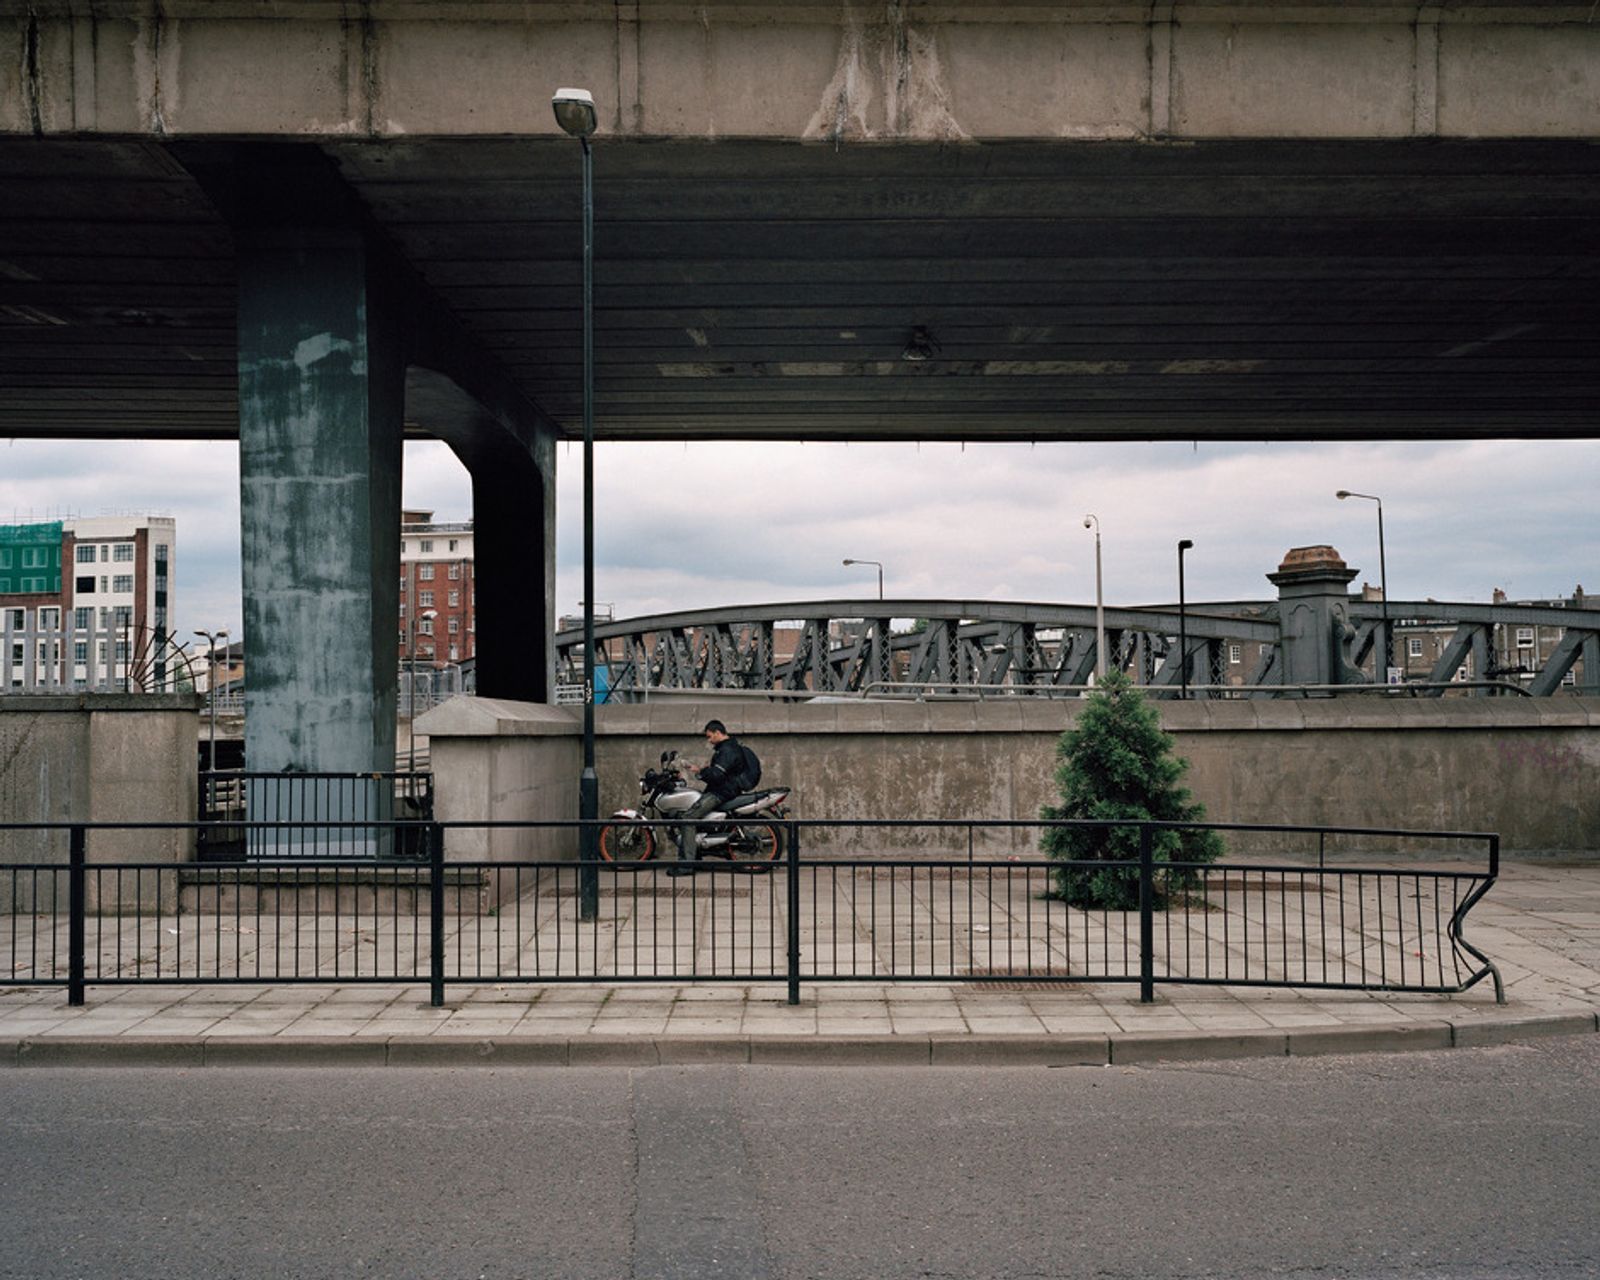 © David Sopronyi - Image from the West Way photography project